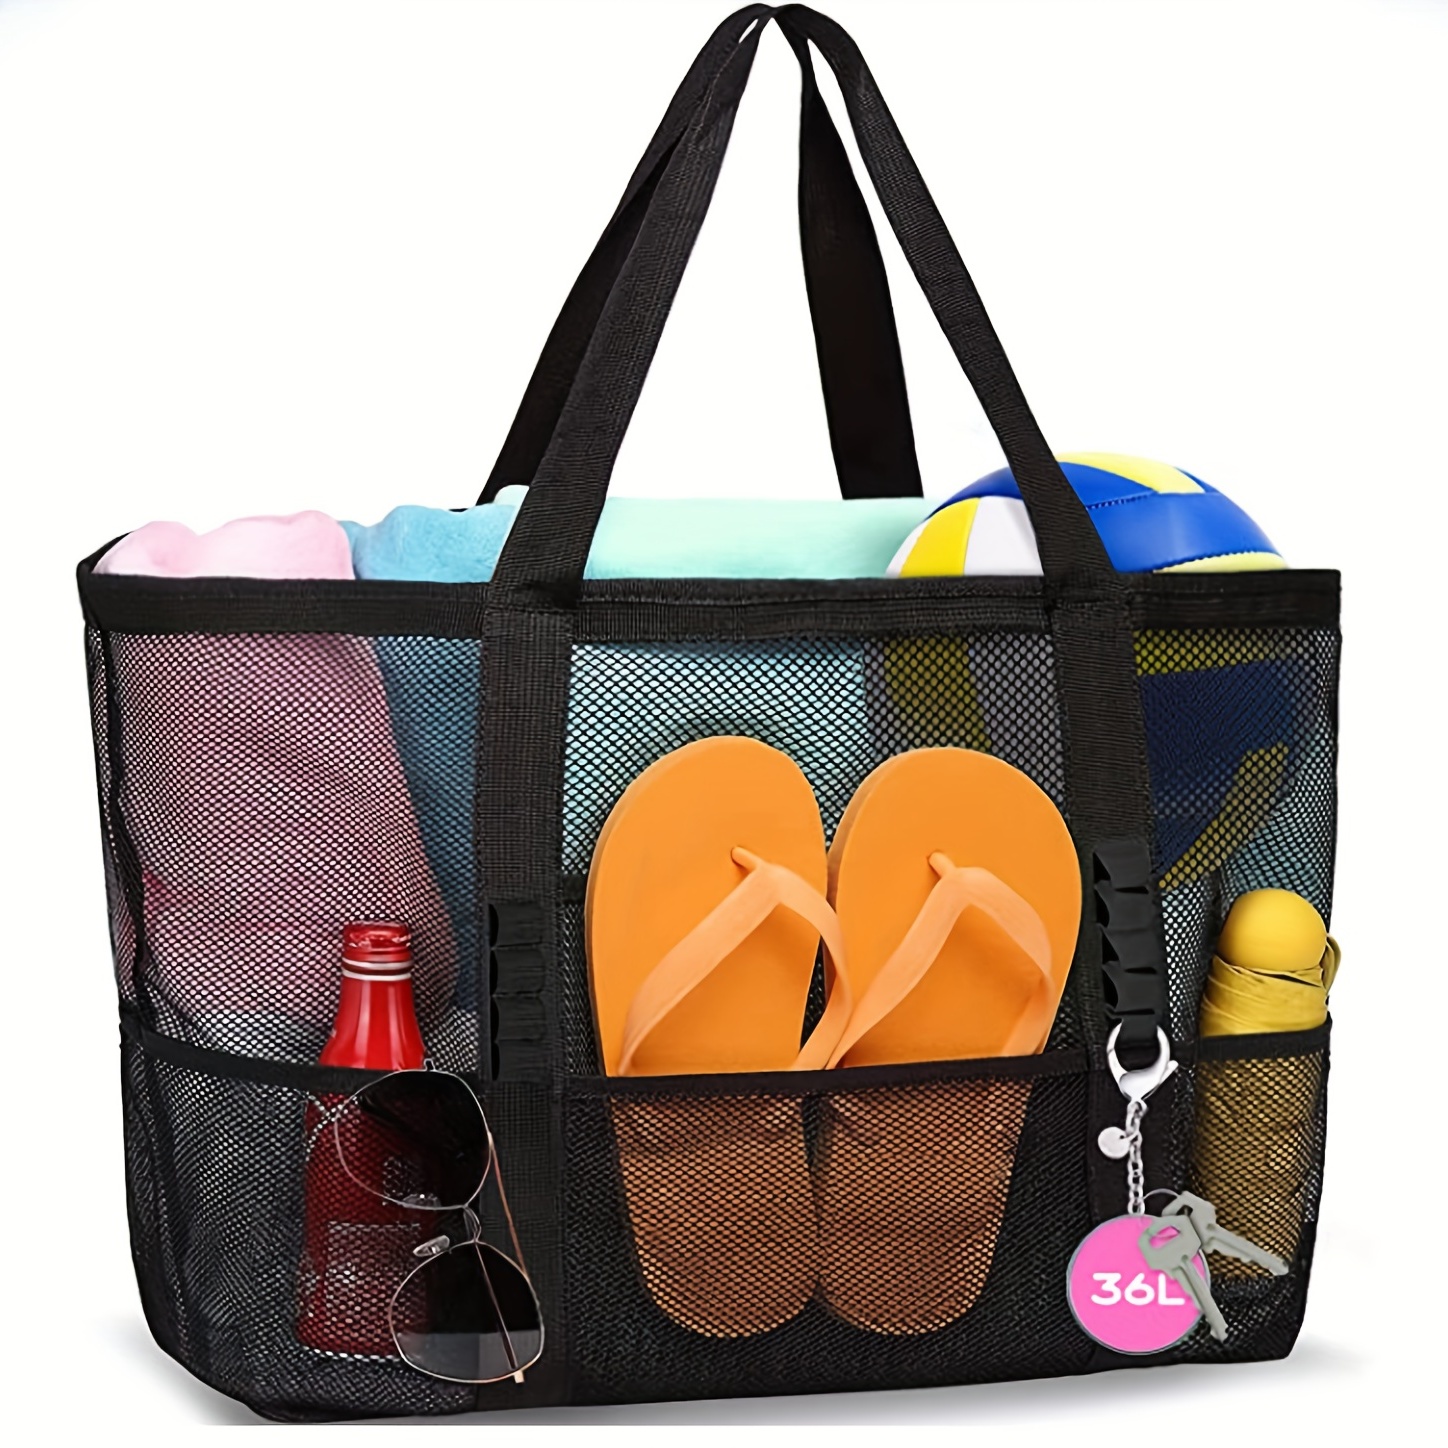 1PCS Large Mesh Beach Bag - Sandproof Swim Tote Bag Oversized for Family  Foldable Lightweight Pool Boat Bag with Zipper and Extra Pockets For Toys &  V